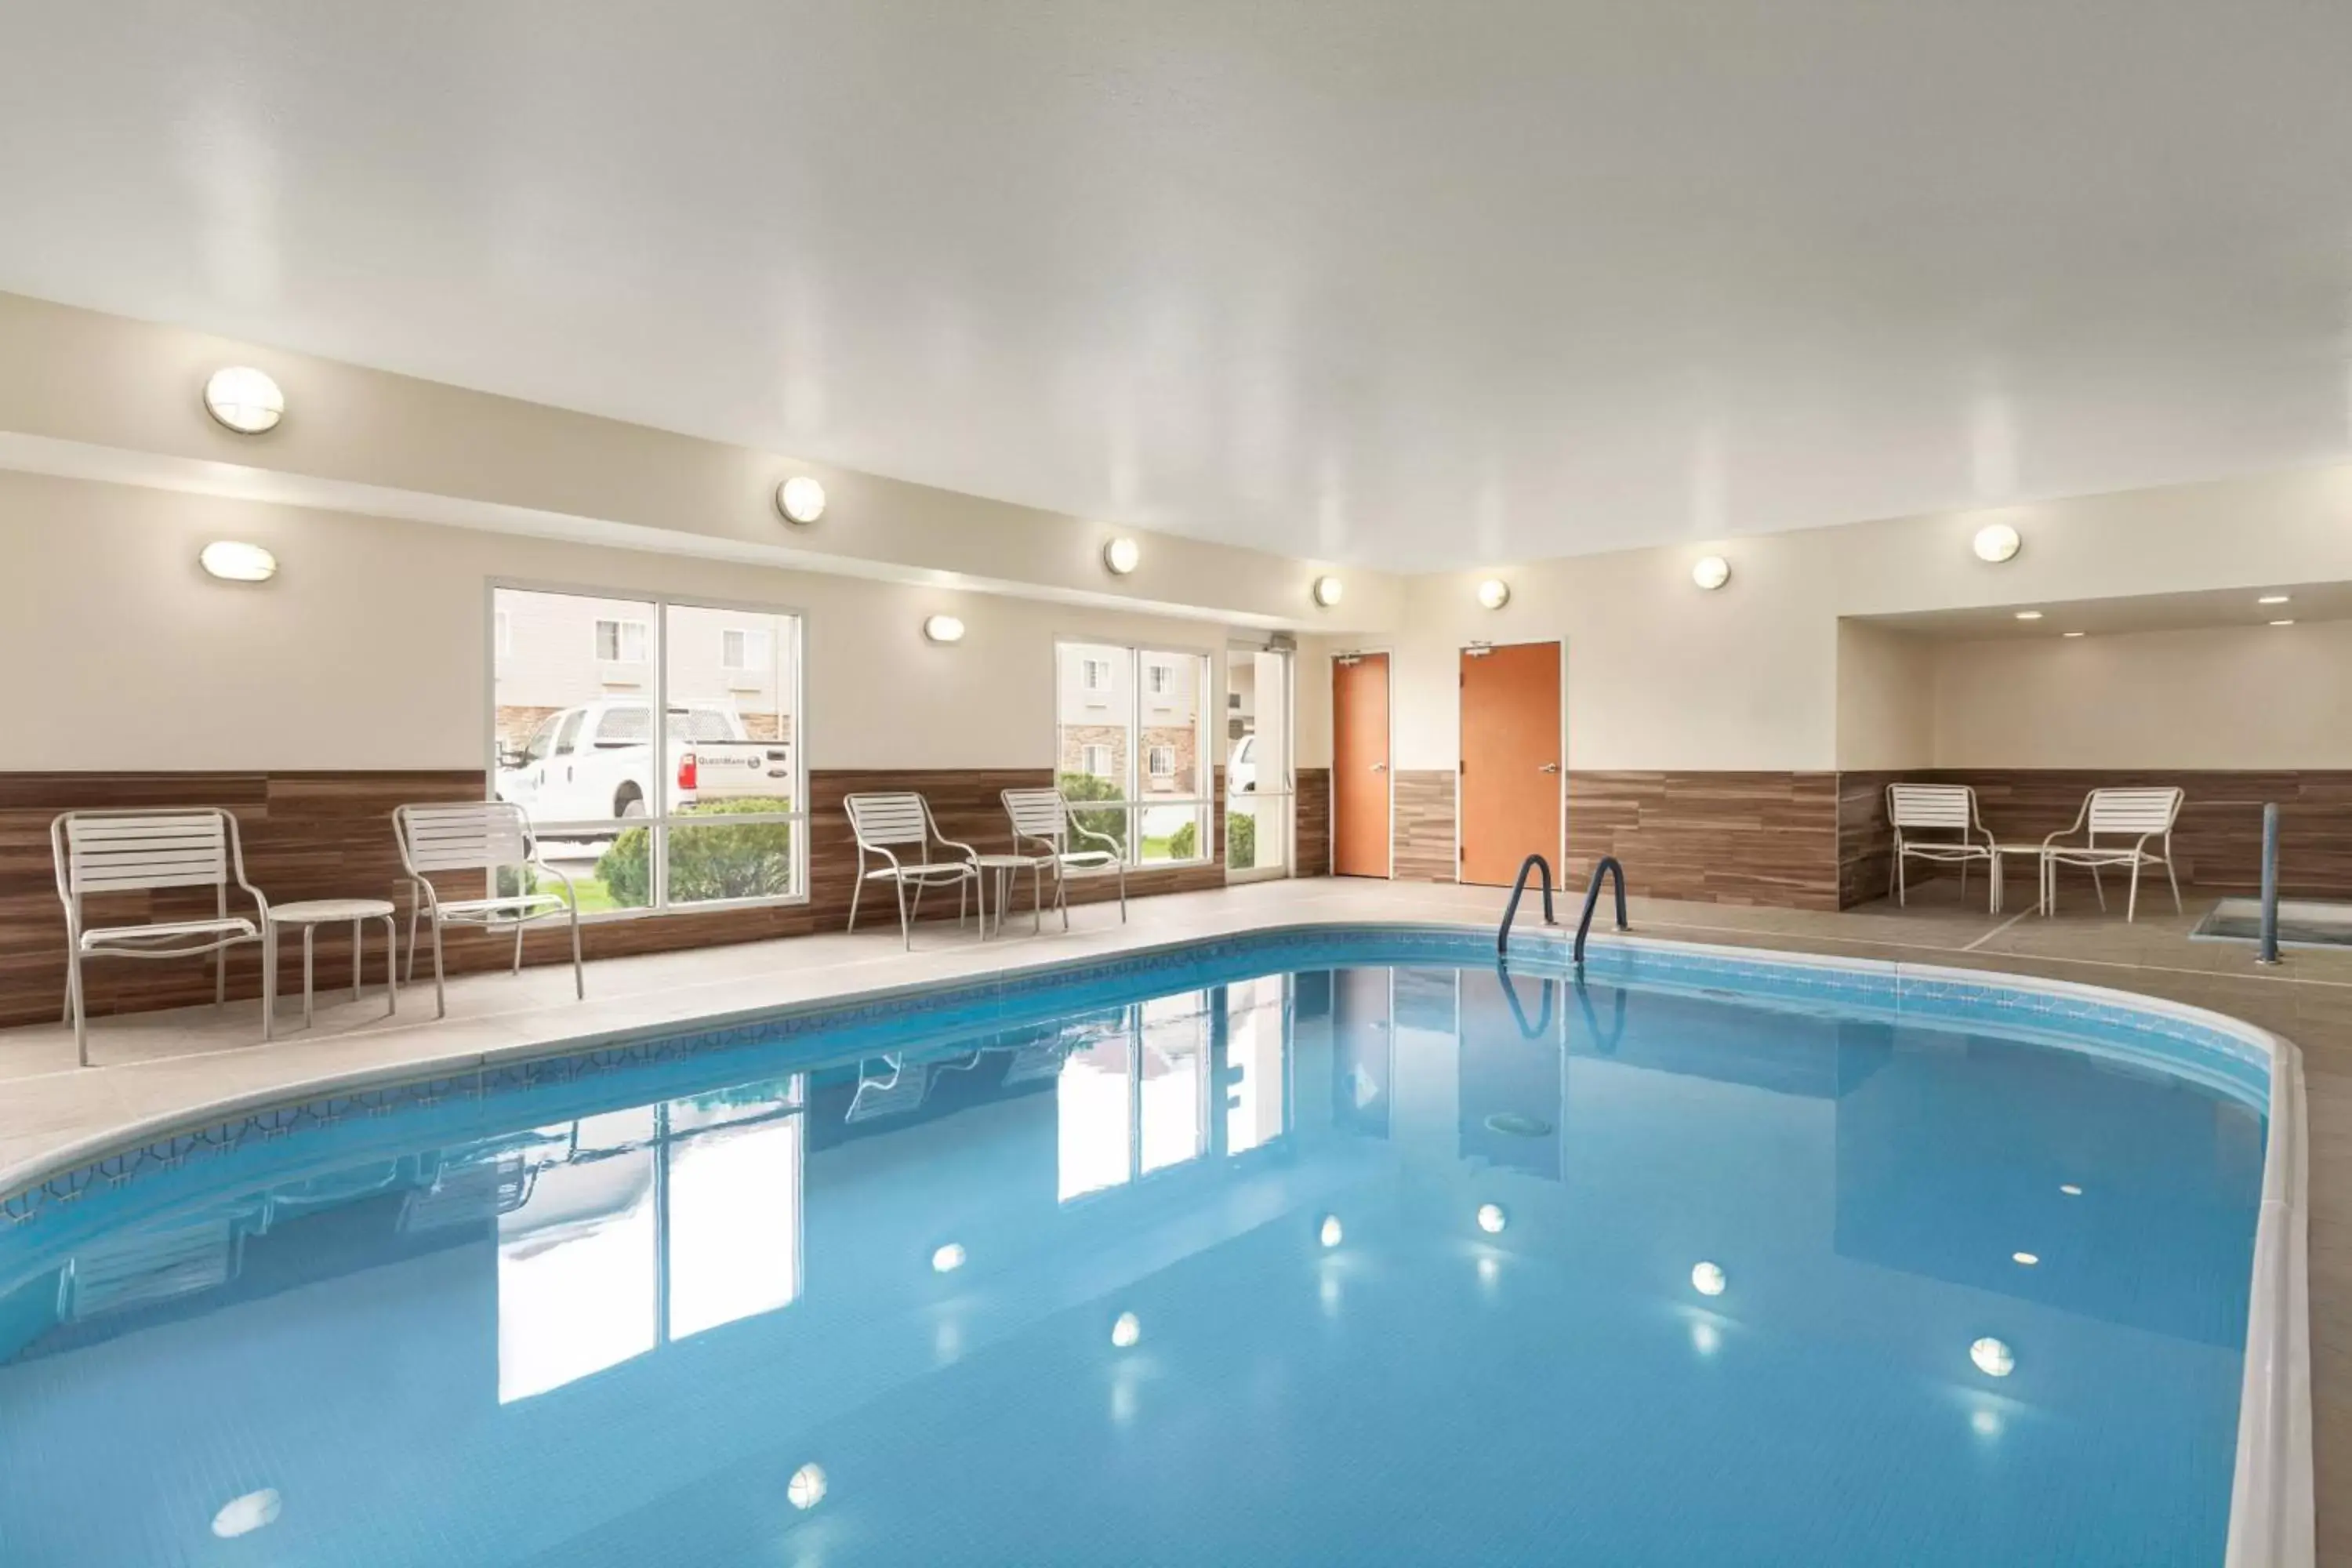 Swimming Pool in Fairfield Inn & Suites Omaha East/Council Bluffs, IA